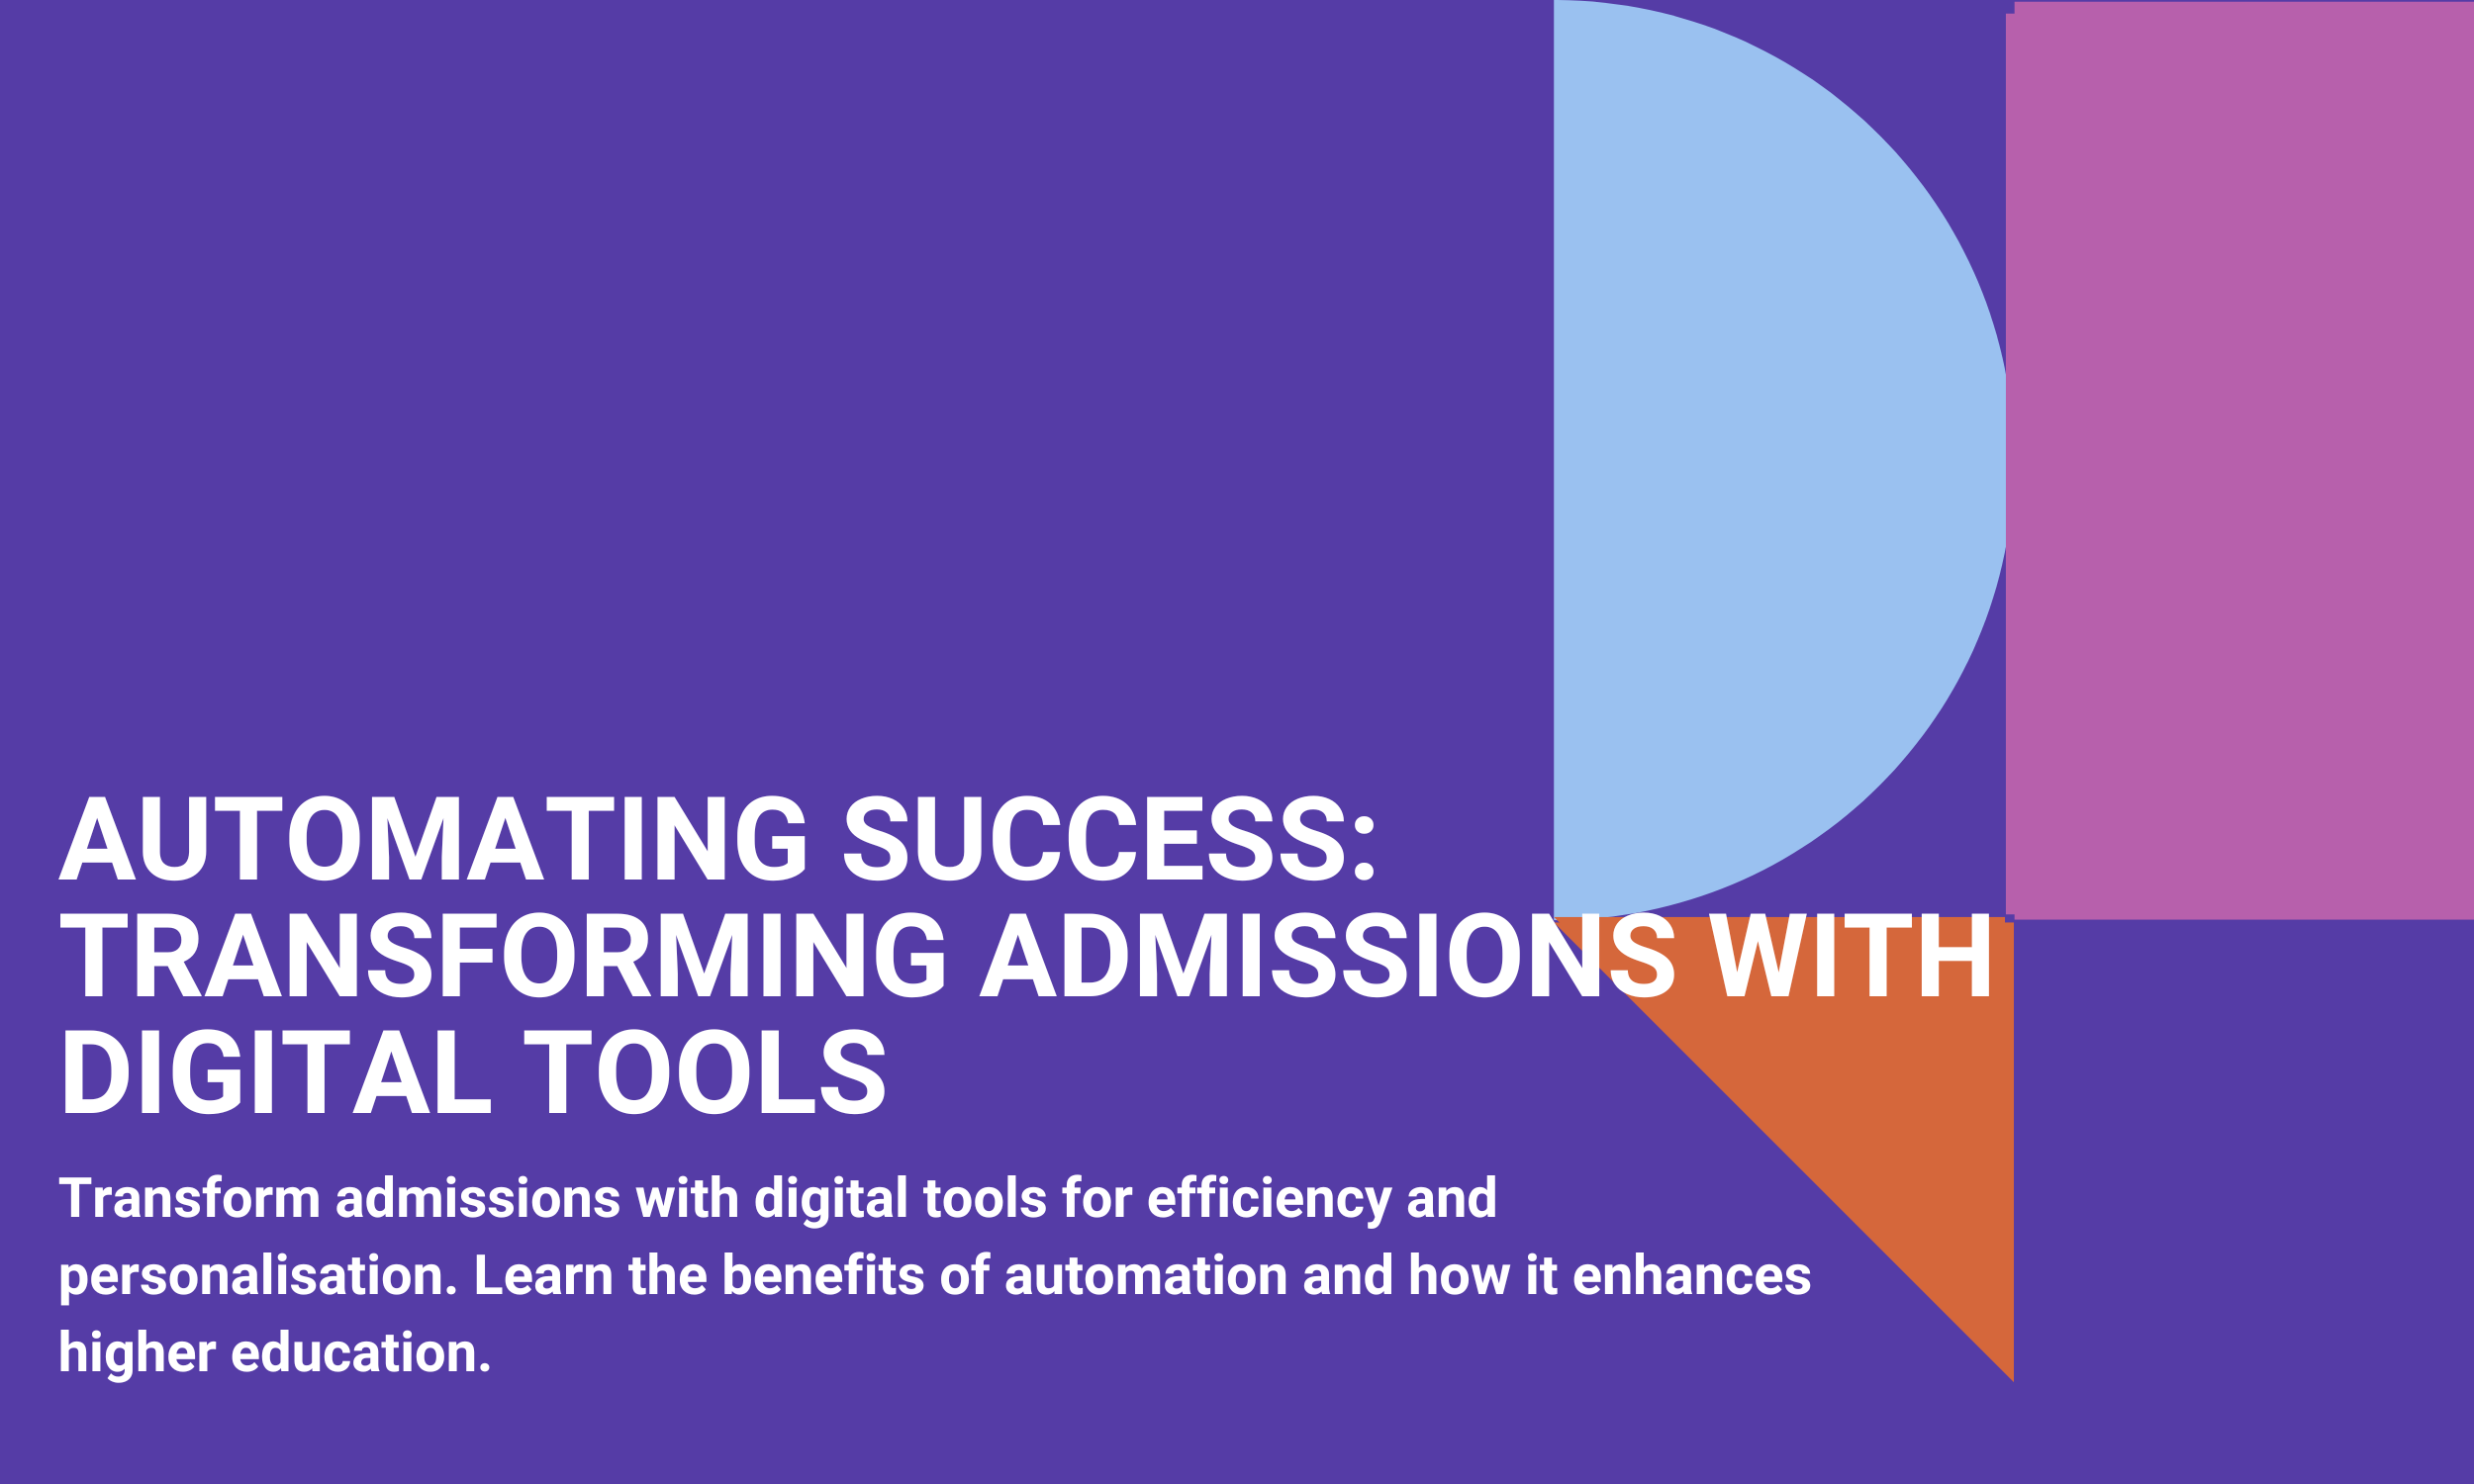 Automating Success: Transforming Admissions with Digital Tools